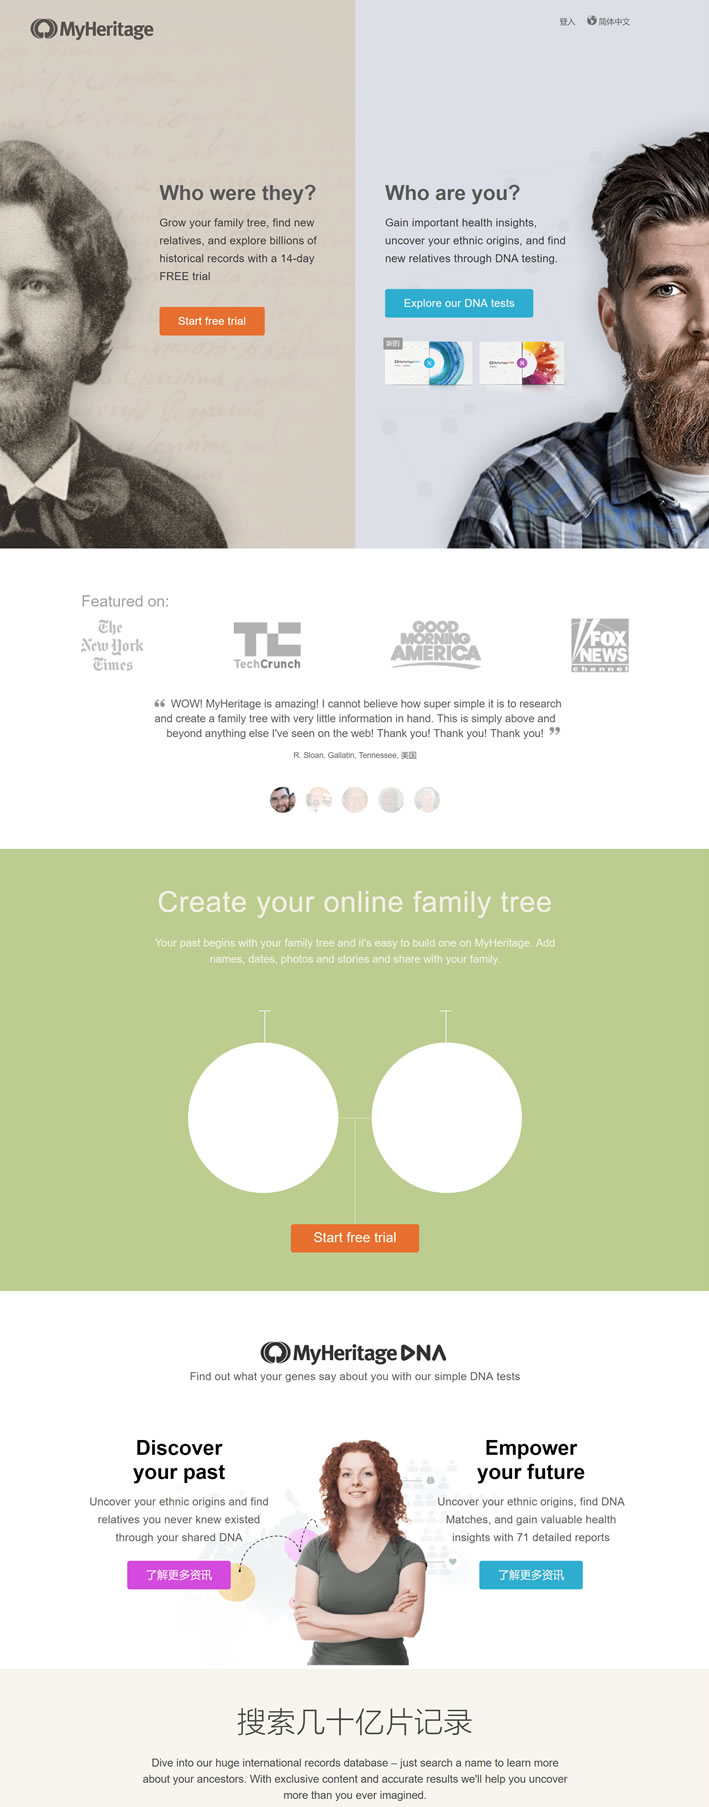 MyHeritage US: Family History Research and DNA Testing